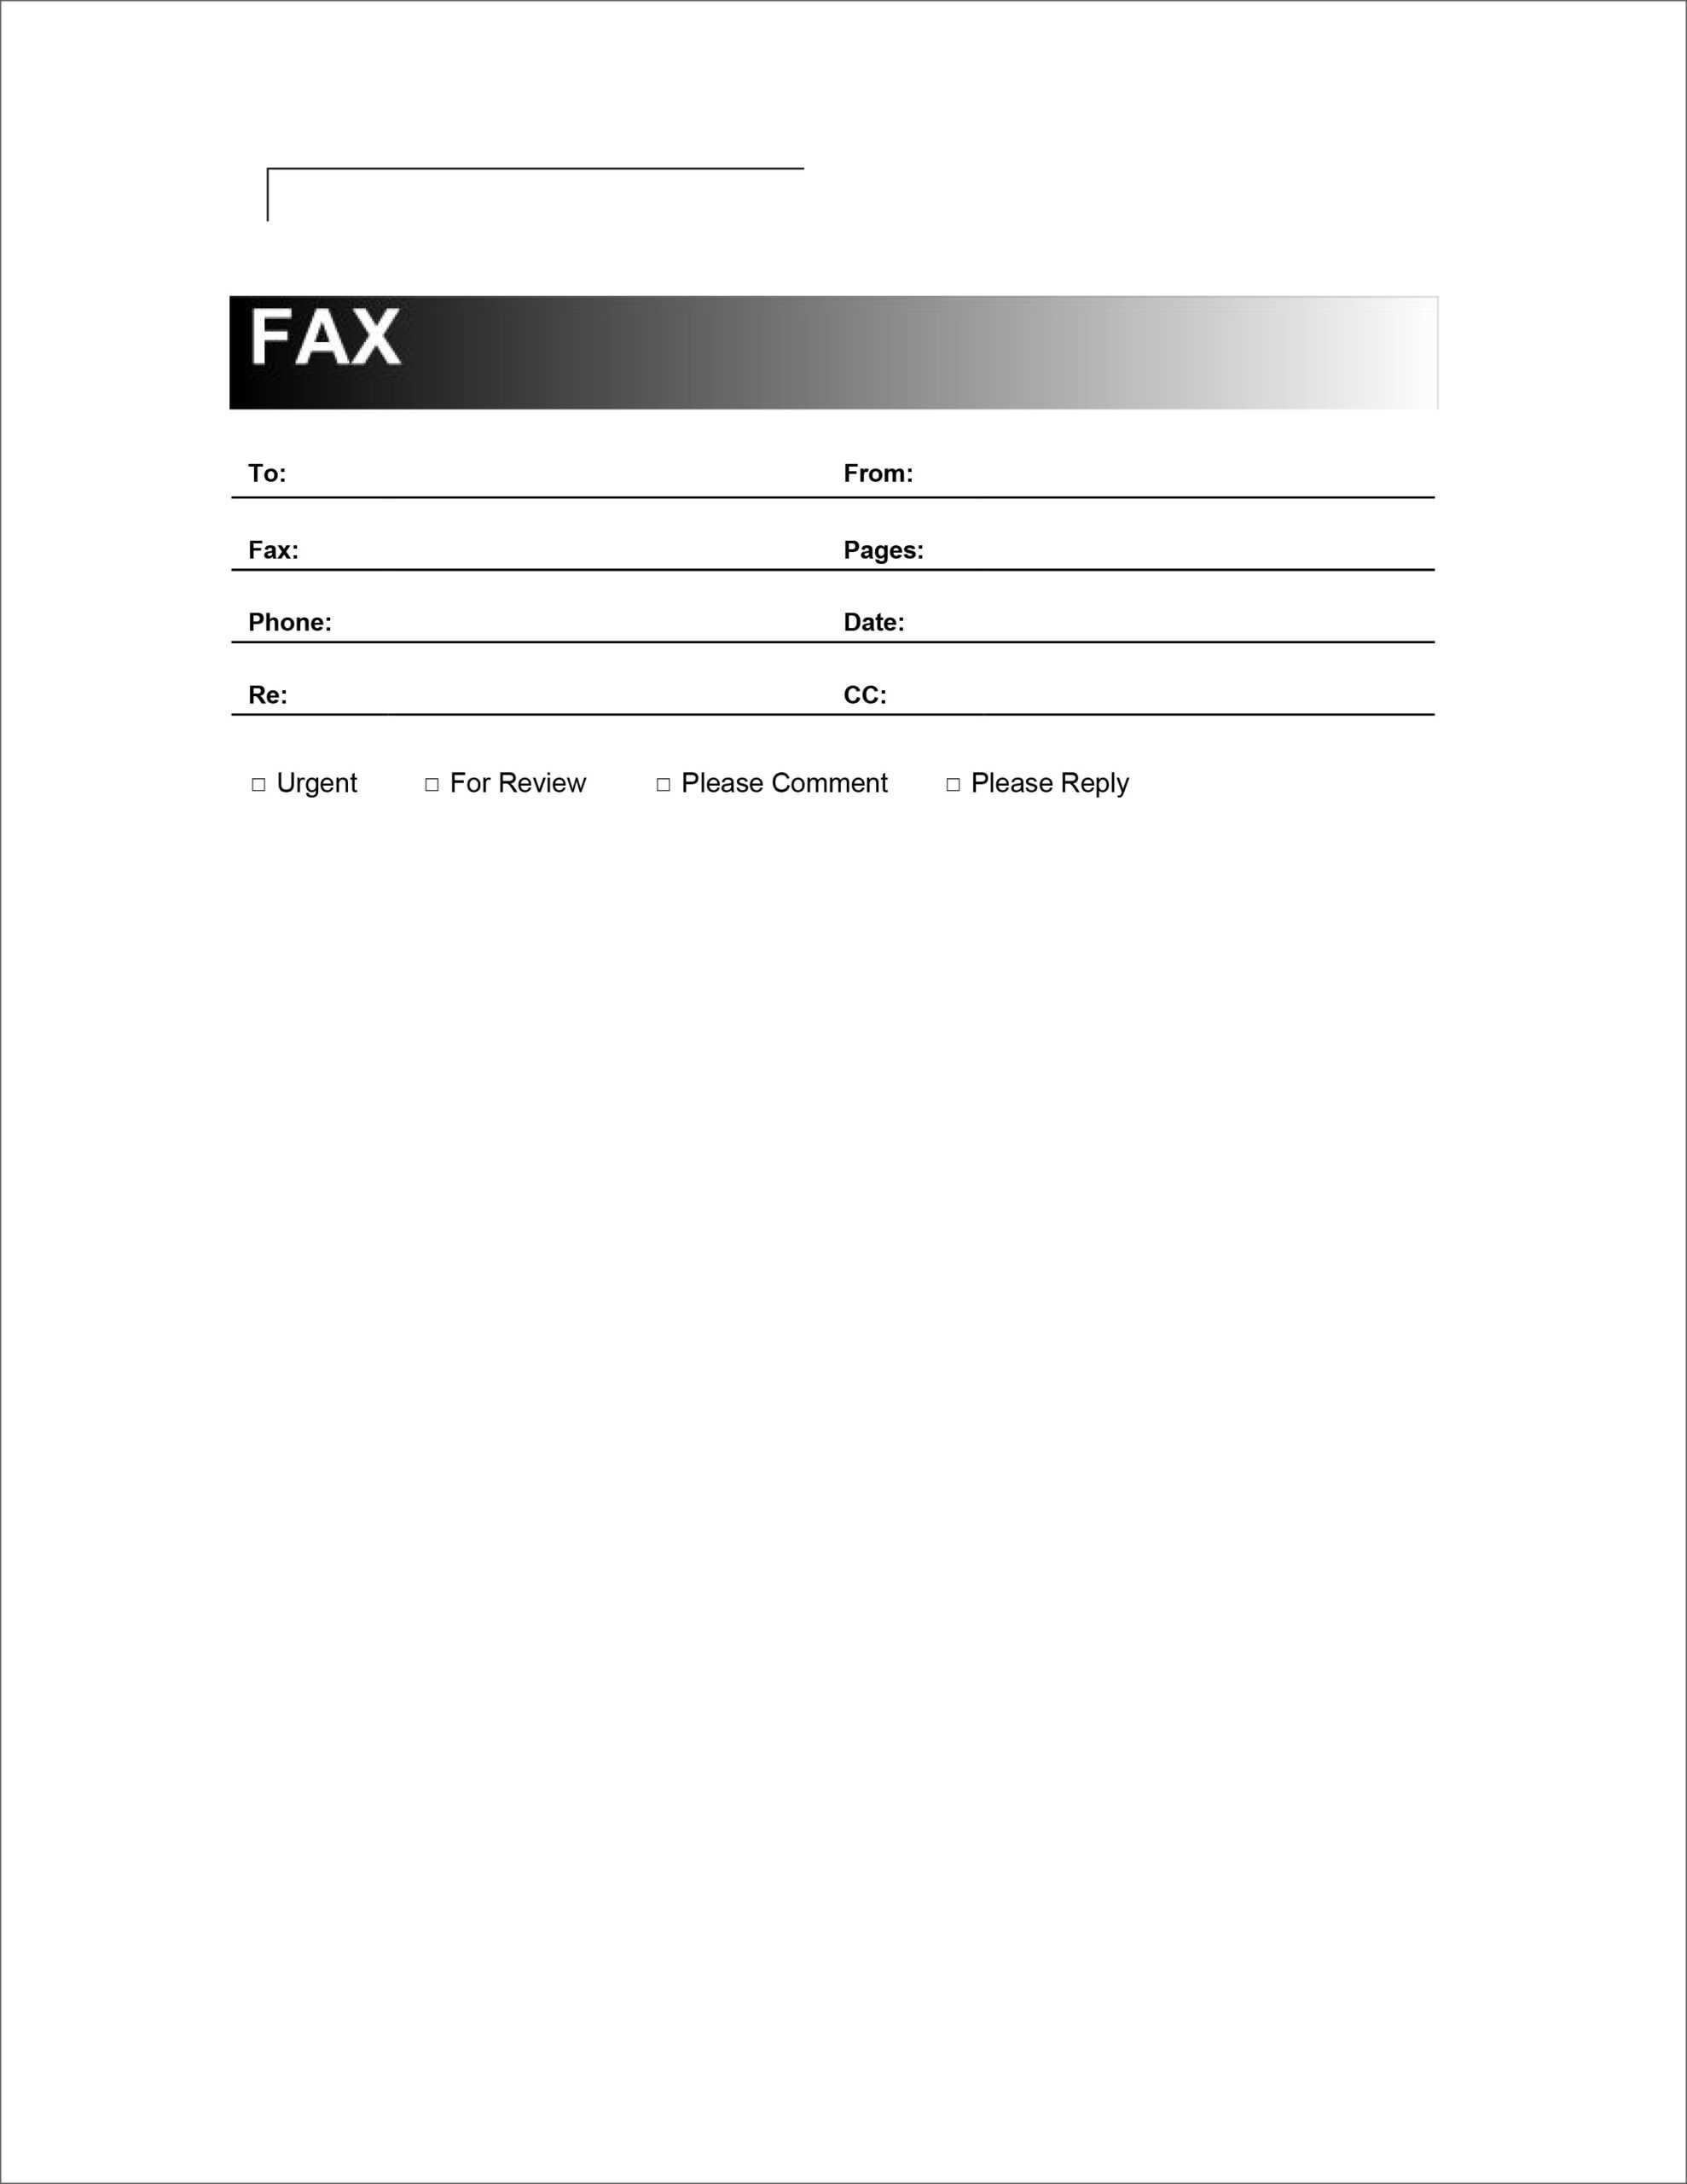 Fax Templates In Word – Dalep.midnightpig.co Within Fax Cover Sheet Template Word 2010